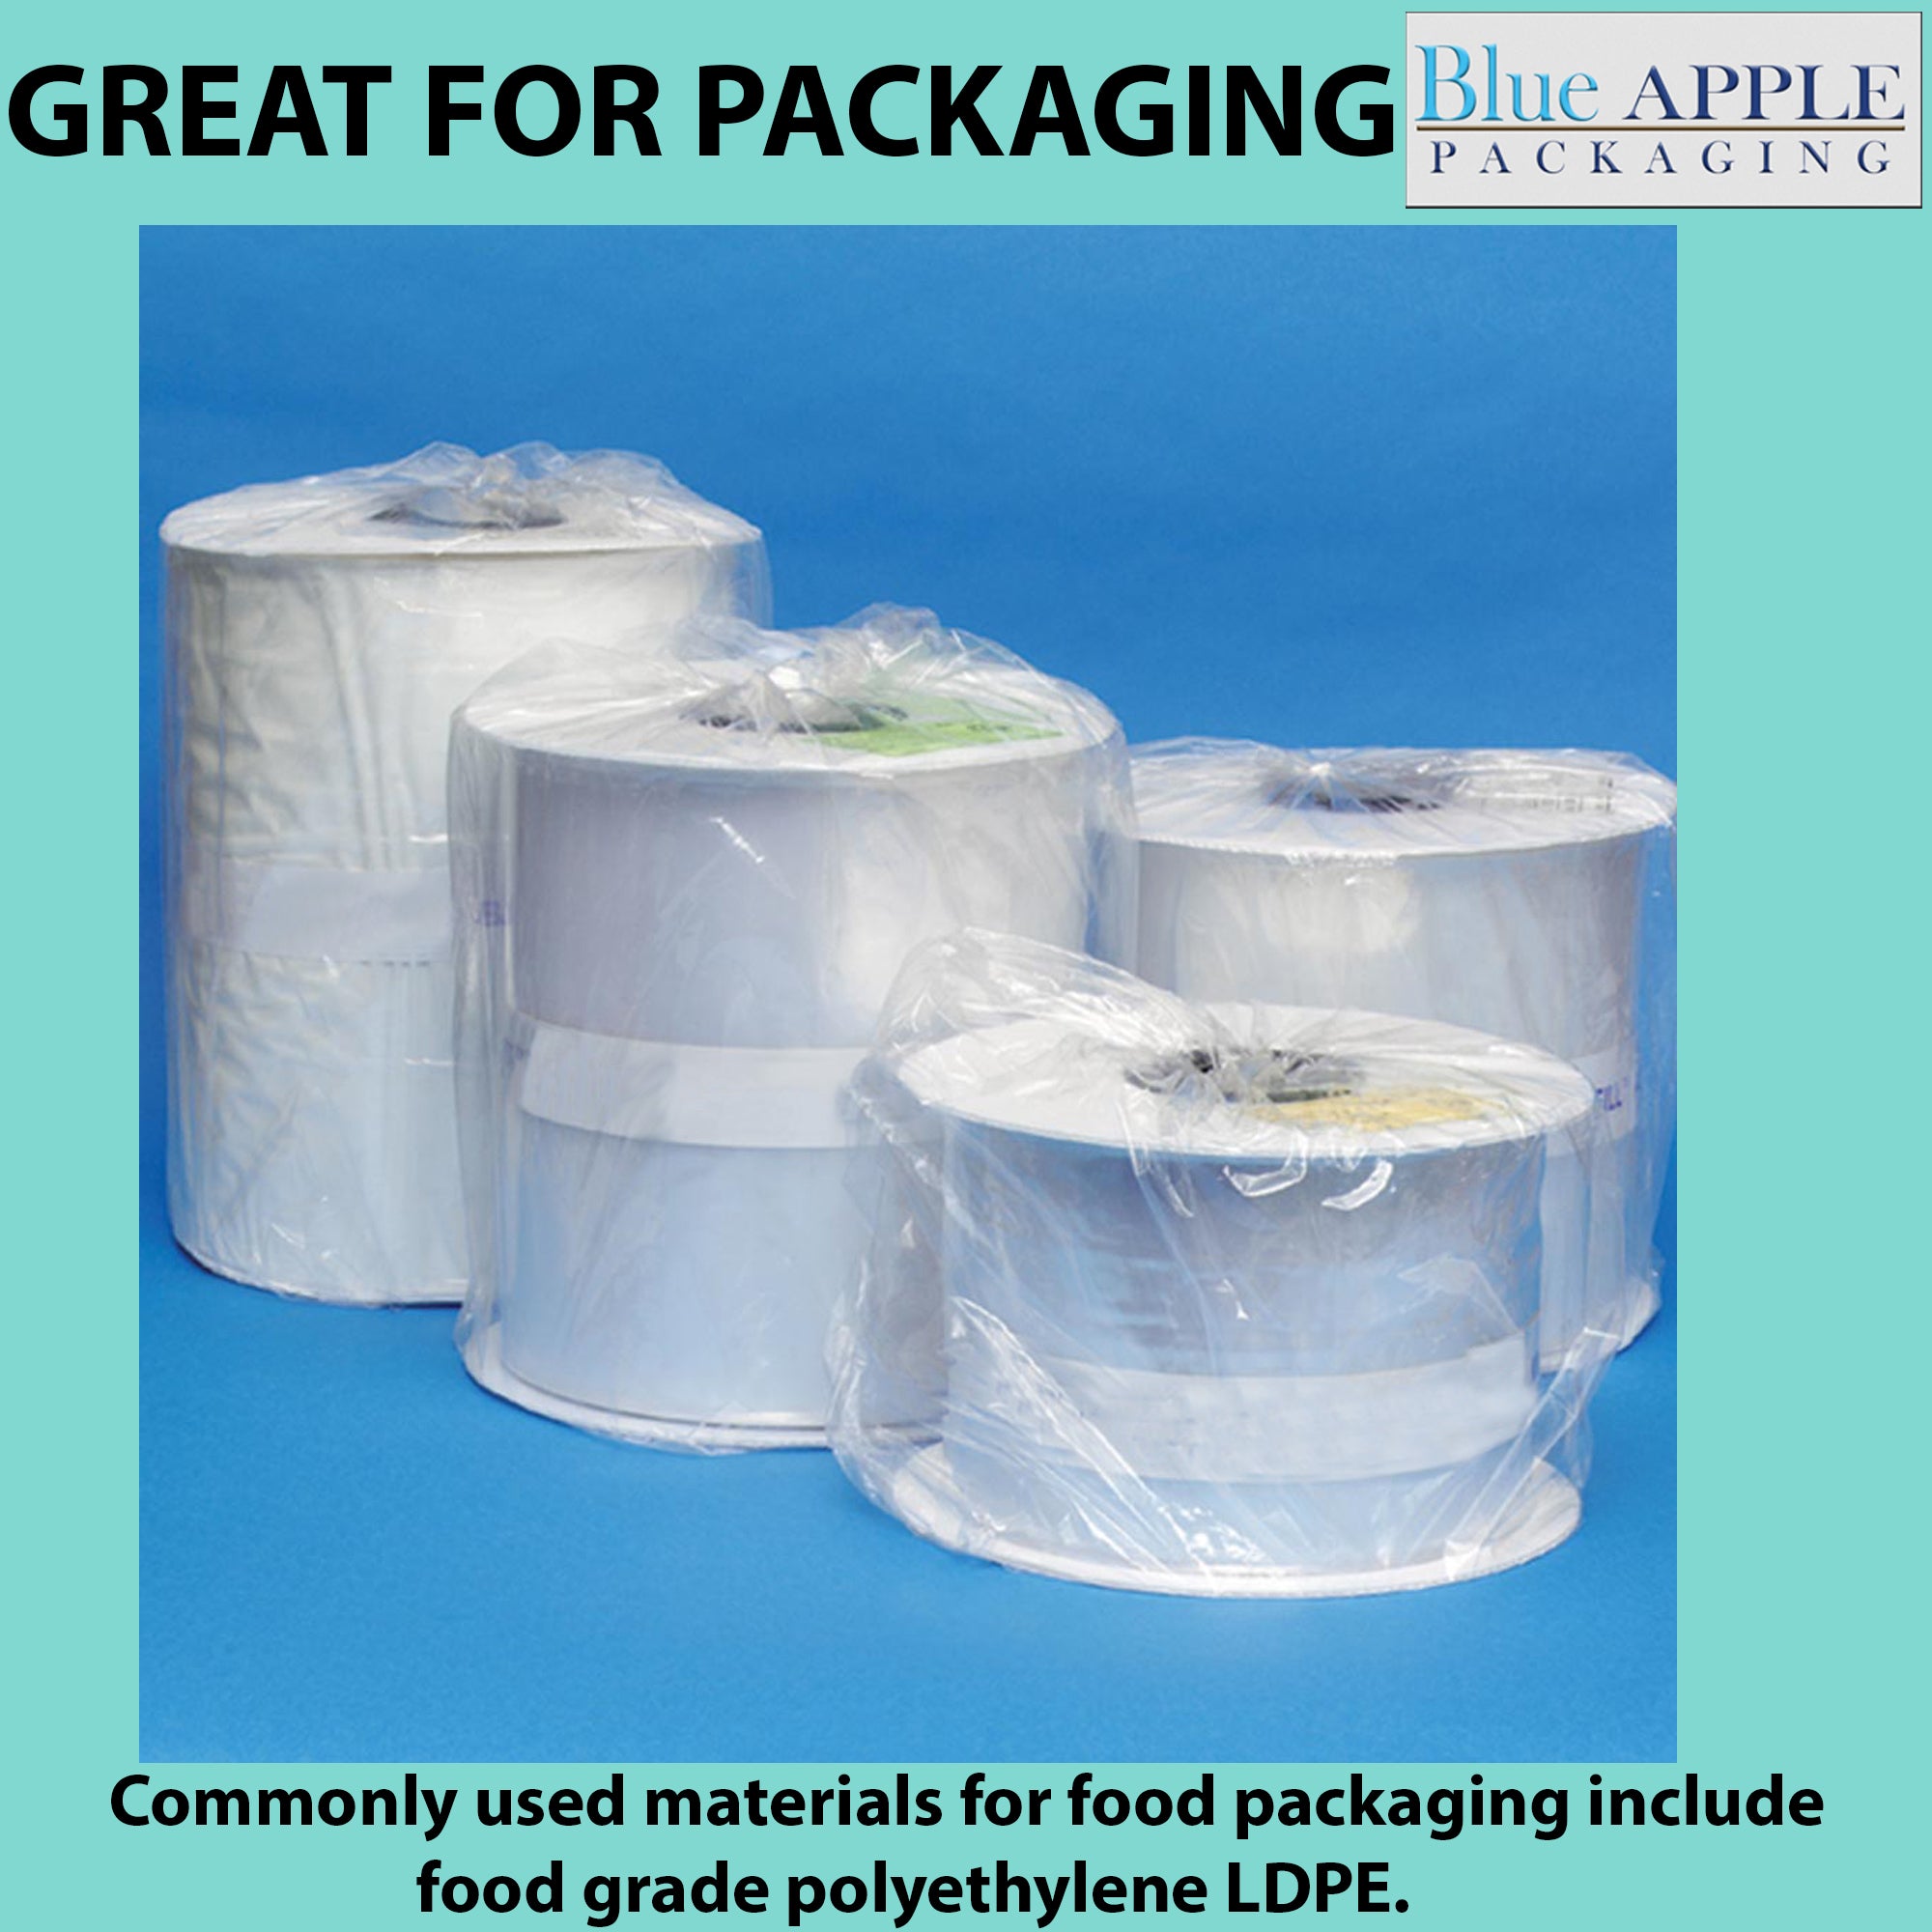 AutoFill Poly Bags Roll Perforated 2.75 Mil 5 inch (width) X 10 inch (height) Roll of 750 Bags